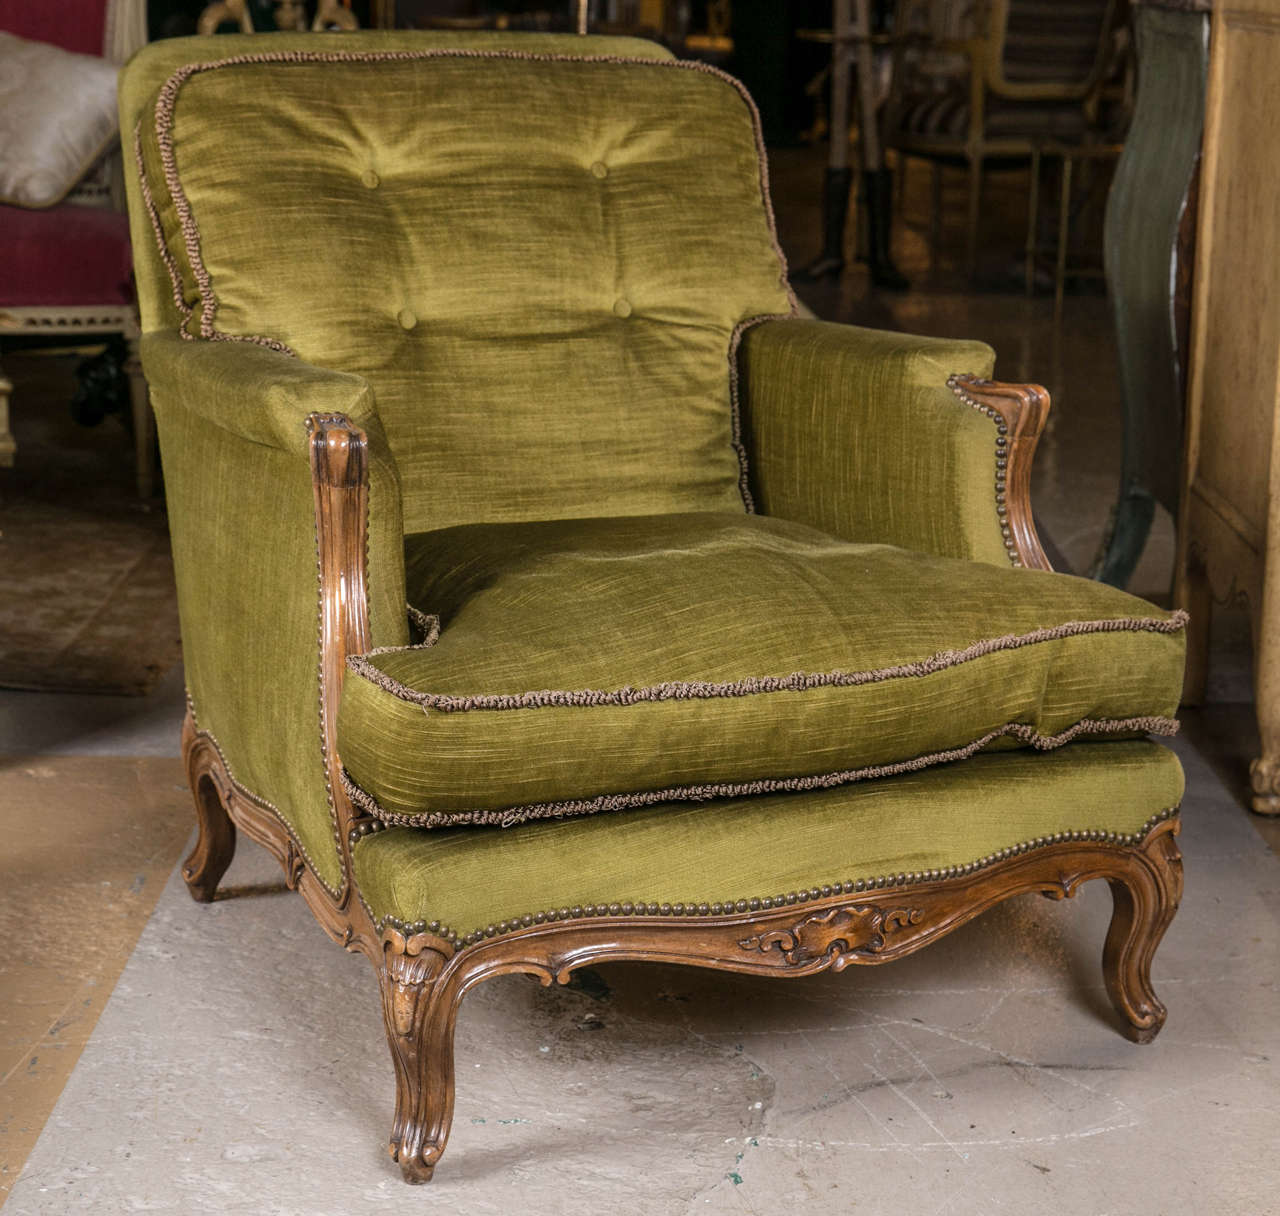 Pair of French Louis XV style bergère lounge chairs by Maison Jansen. Finest pair of carved Louis XV style arm - lounge chairs. The carved legs and apron leading to a pair of swaying armrests. The velour type upholstery having a cushion back and set